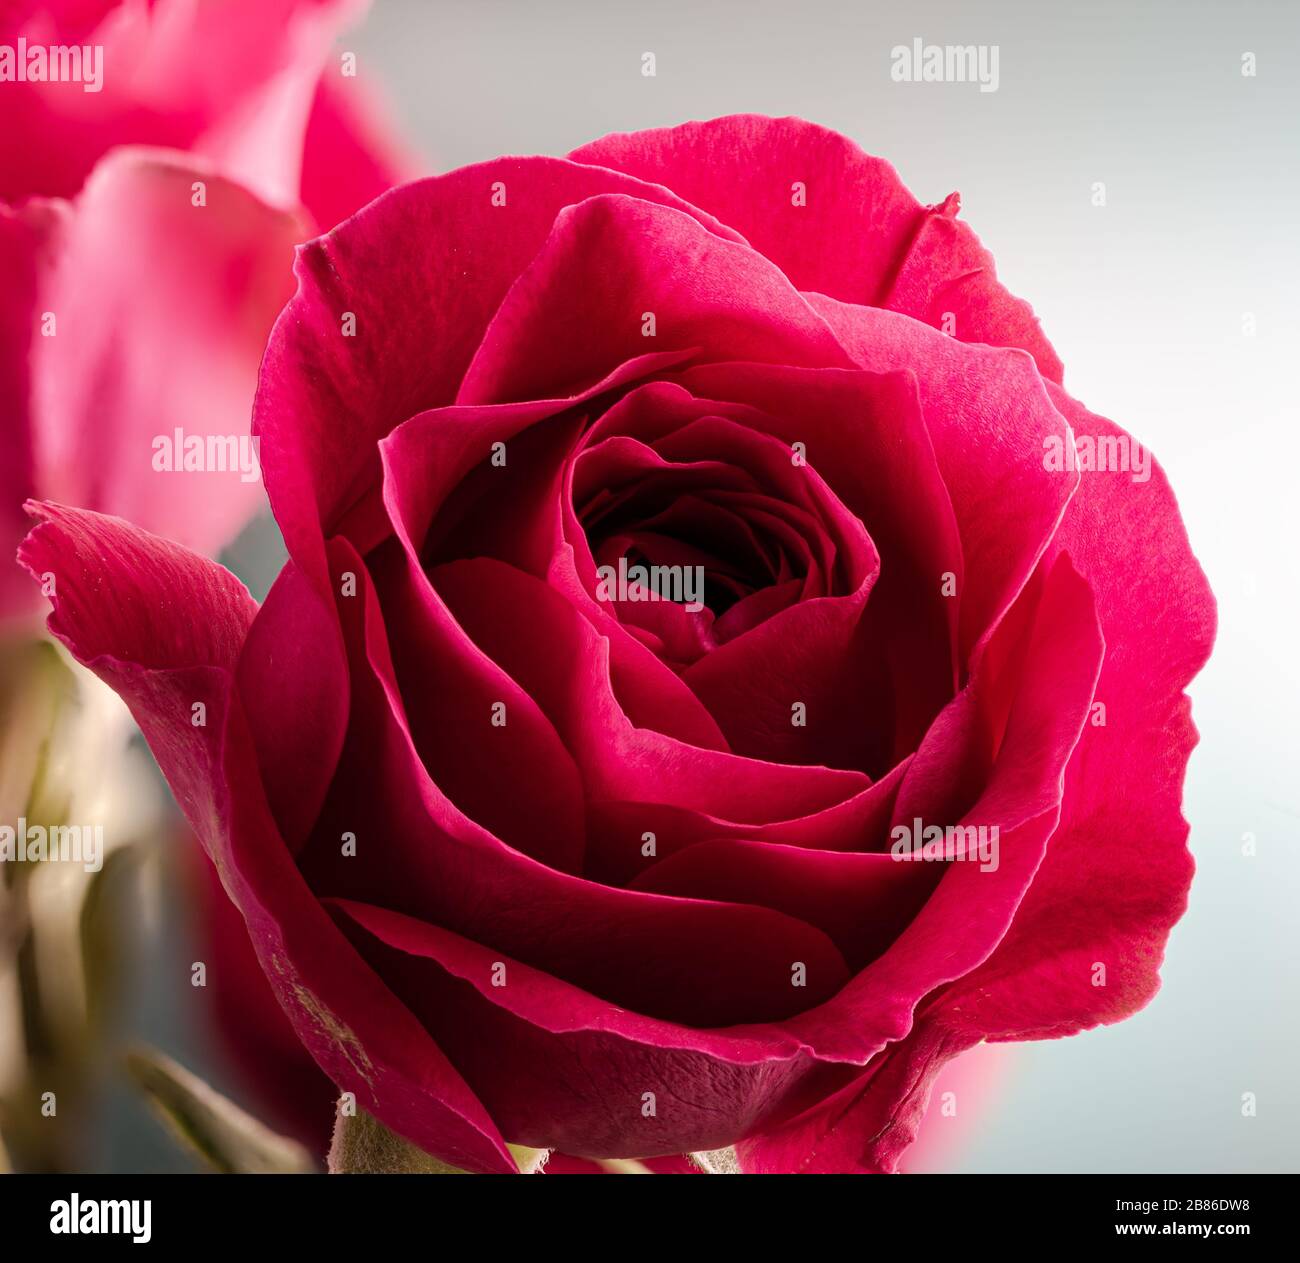 Closeup of a beautiful red rose on light colored background Stock Photo